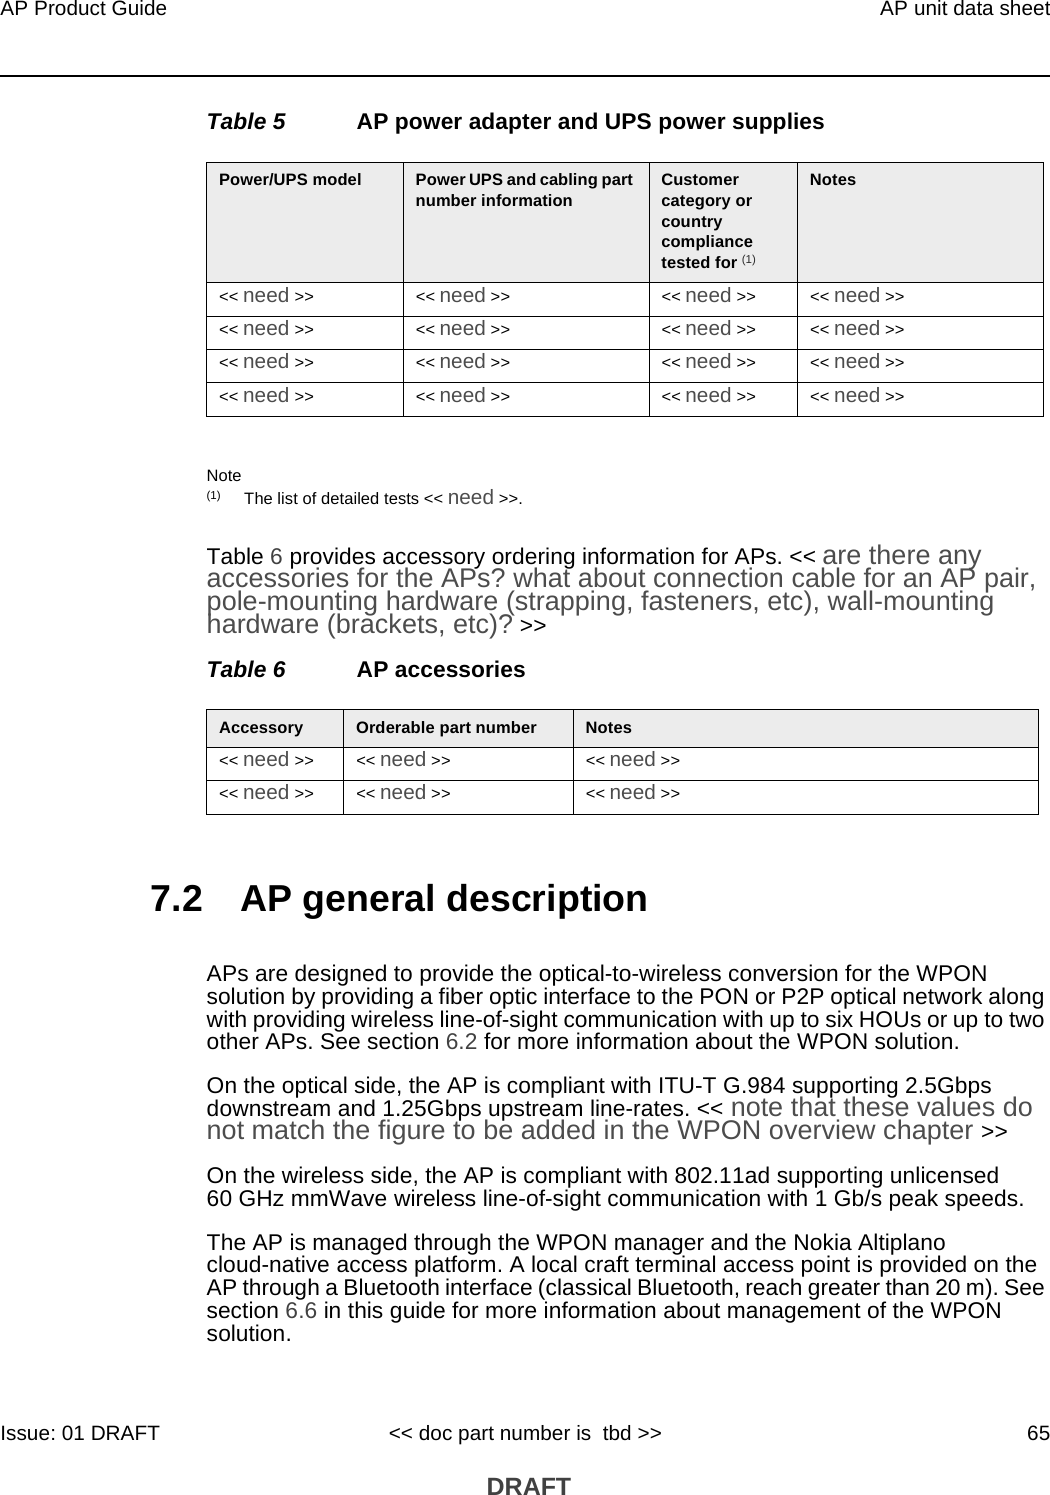 AP Product Guide AP unit data sheetIssue: 01 DRAFT &lt;&lt; doc part number is  tbd &gt;&gt; 65 DRAFTTable 5 AP power adapter and UPS power suppliesNote(1) The list of detailed tests &lt;&lt; need &gt;&gt;.Table 6 provides accessory ordering information for APs. &lt;&lt; are there any accessories for the APs? what about connection cable for an AP pair, pole-mounting hardware (strapping, fasteners, etc), wall-mounting hardware (brackets, etc)? &gt;&gt;Table 6 AP accessories7.2 AP general descriptionAPs are designed to provide the optical-to-wireless conversion for the WPON solution by providing a fiber optic interface to the PON or P2P optical network along with providing wireless line-of-sight communication with up to six HOUs or up to two other APs. See section 6.2 for more information about the WPON solution.On the optical side, the AP is compliant with ITU-T G.984 supporting 2.5Gbps downstream and 1.25Gbps upstream line-rates. &lt;&lt; note that these values do not match the figure to be added in the WPON overview chapter &gt;&gt;On the wireless side, the AP is compliant with 802.11ad supporting unlicensed 60 GHz mmWave wireless line-of-sight communication with 1 Gb/s peak speeds.The AP is managed through the WPON manager and the Nokia Altiplano cloud-native access platform. A local craft terminal access point is provided on the AP through a Bluetooth interface (classical Bluetooth, reach greater than 20 m). See section 6.6 in this guide for more information about management of the WPON solution. Power/UPS model  Power UPS and cabling part number information Customer category or country compliance tested for (1)Notes&lt;&lt; need &gt;&gt; &lt;&lt; need &gt;&gt; &lt;&lt; need &gt;&gt; &lt;&lt; need &gt;&gt;&lt;&lt; need &gt;&gt; &lt;&lt; need &gt;&gt; &lt;&lt; need &gt;&gt; &lt;&lt; need &gt;&gt;&lt;&lt; need &gt;&gt; &lt;&lt; need &gt;&gt; &lt;&lt; need &gt;&gt; &lt;&lt; need &gt;&gt;&lt;&lt; need &gt;&gt; &lt;&lt; need &gt;&gt; &lt;&lt; need &gt;&gt; &lt;&lt; need &gt;&gt;Accessory Orderable part number Notes&lt;&lt; need &gt;&gt; &lt;&lt; need &gt;&gt; &lt;&lt; need &gt;&gt;&lt;&lt; need &gt;&gt; &lt;&lt; need &gt;&gt; &lt;&lt; need &gt;&gt;